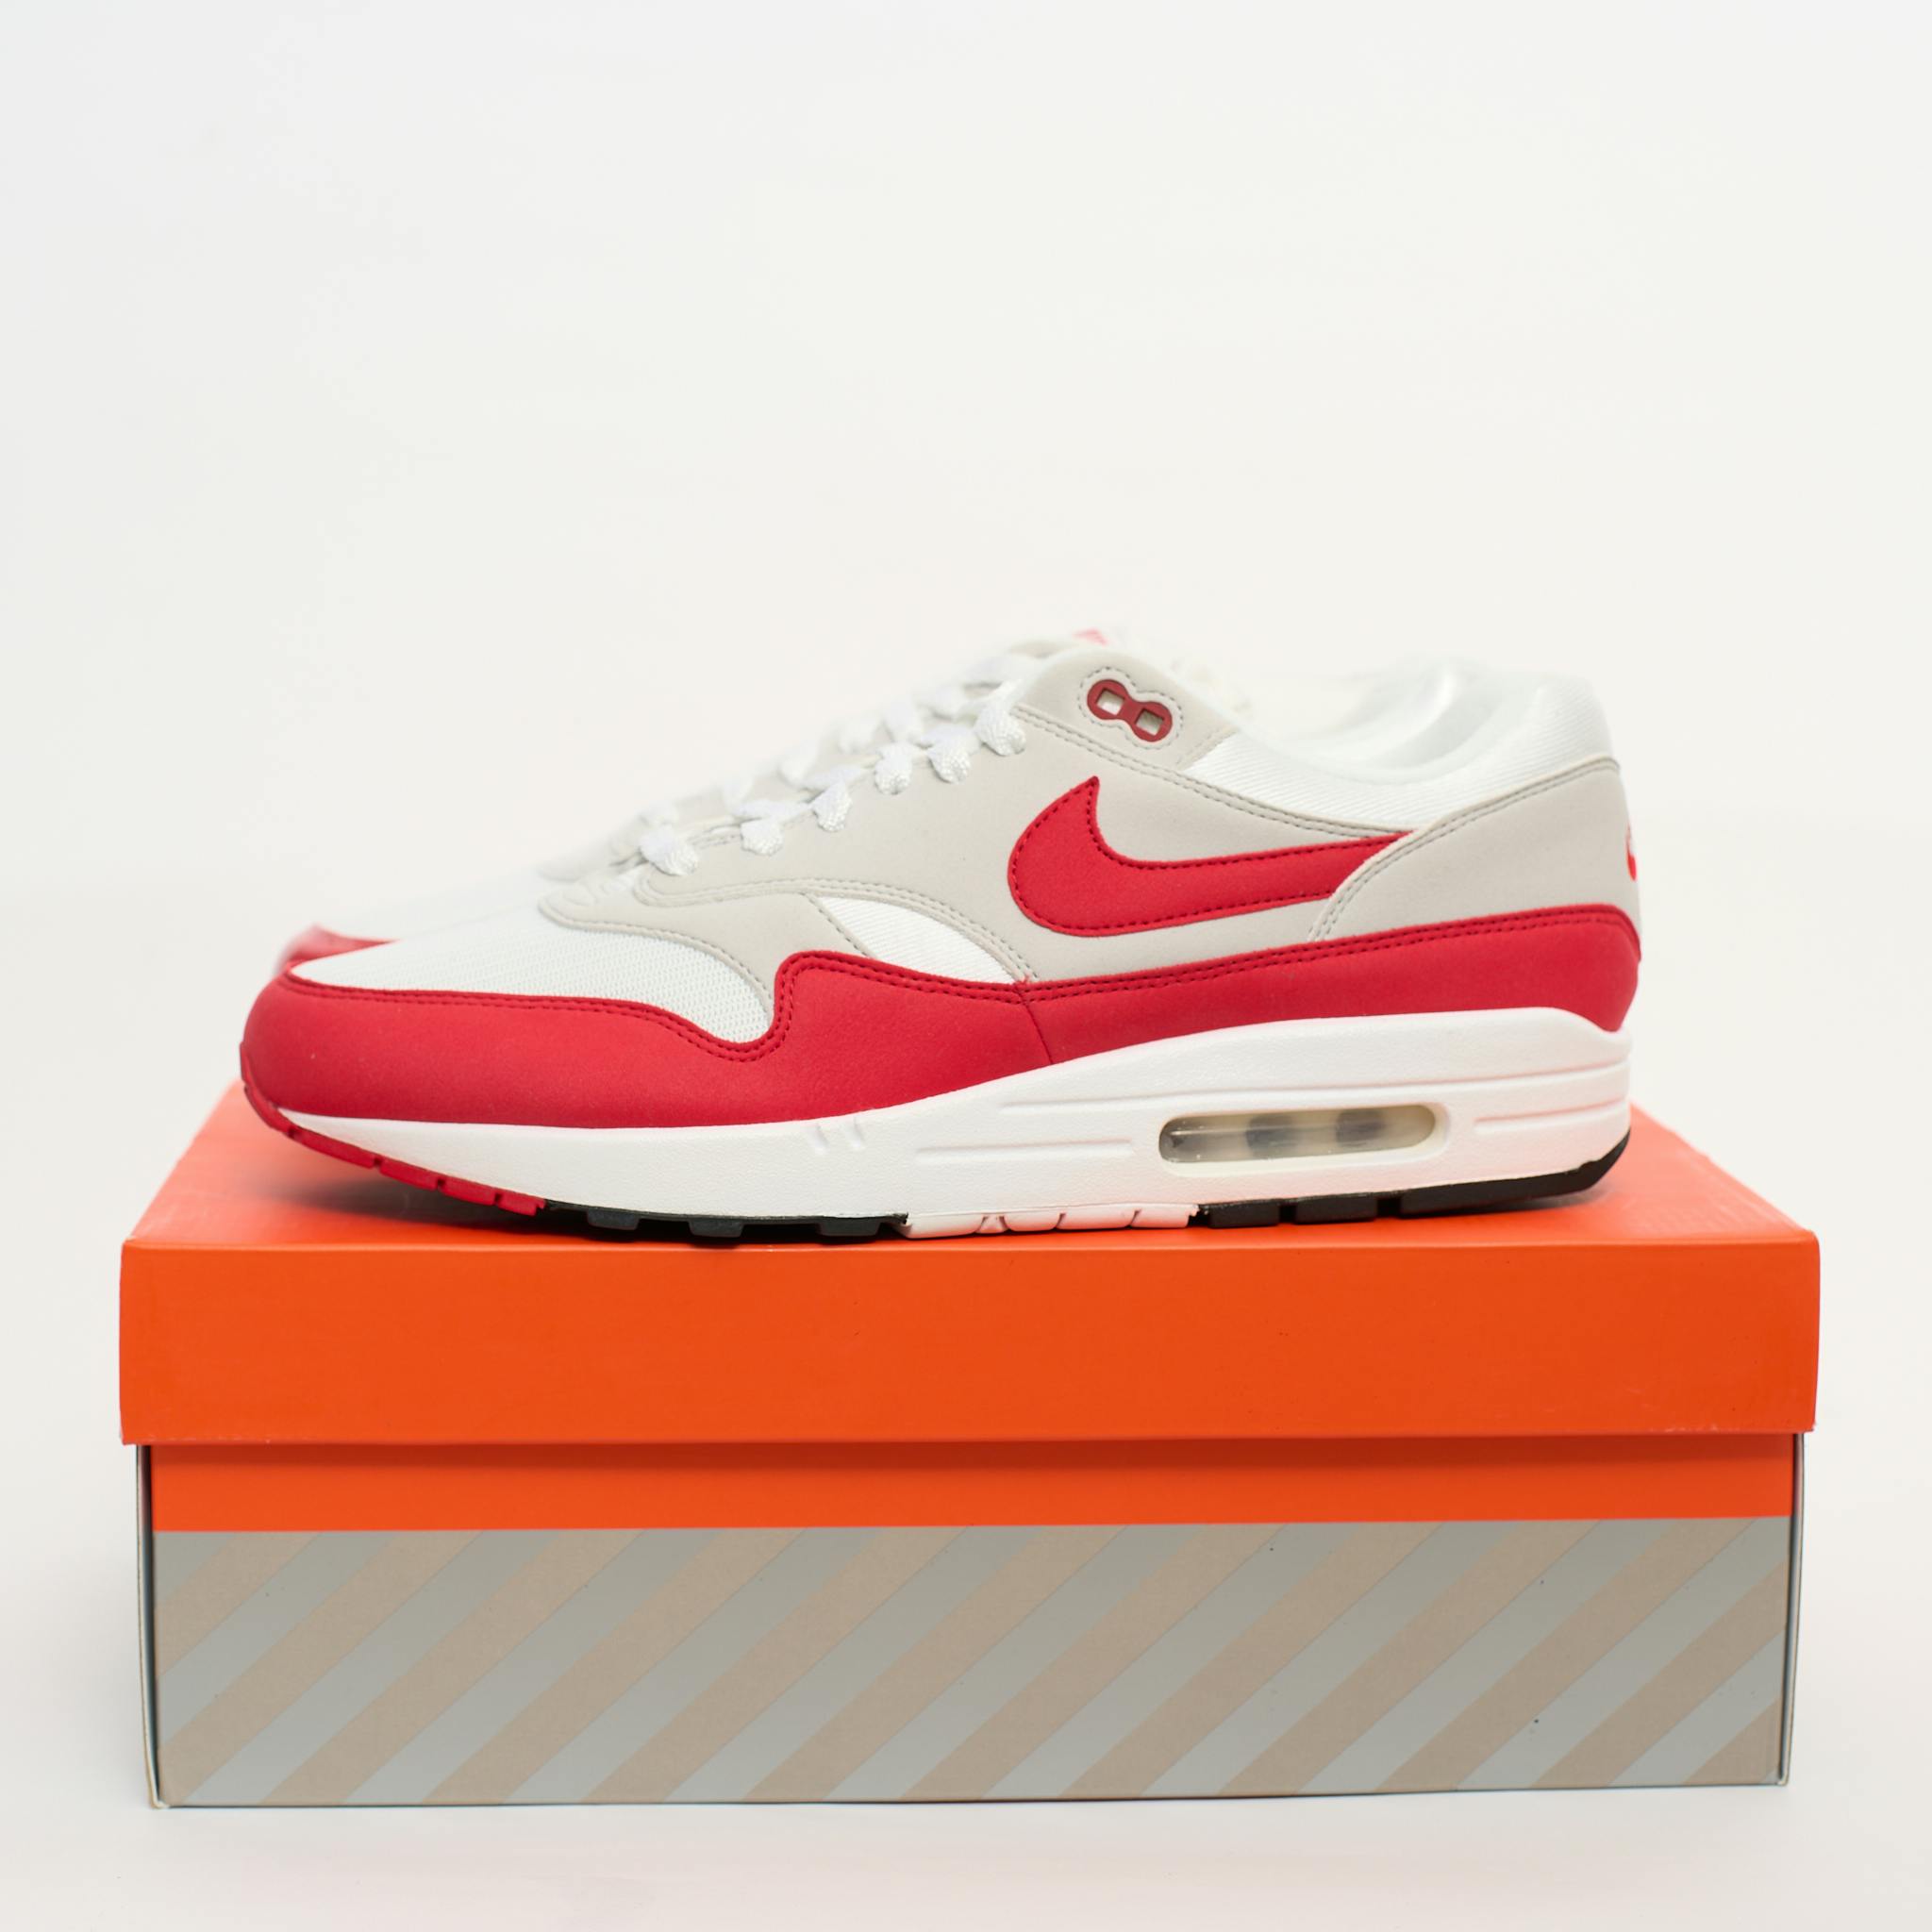 Nike Air Max 1 Anniversary Red Autographed Tinker Hatfield - 4